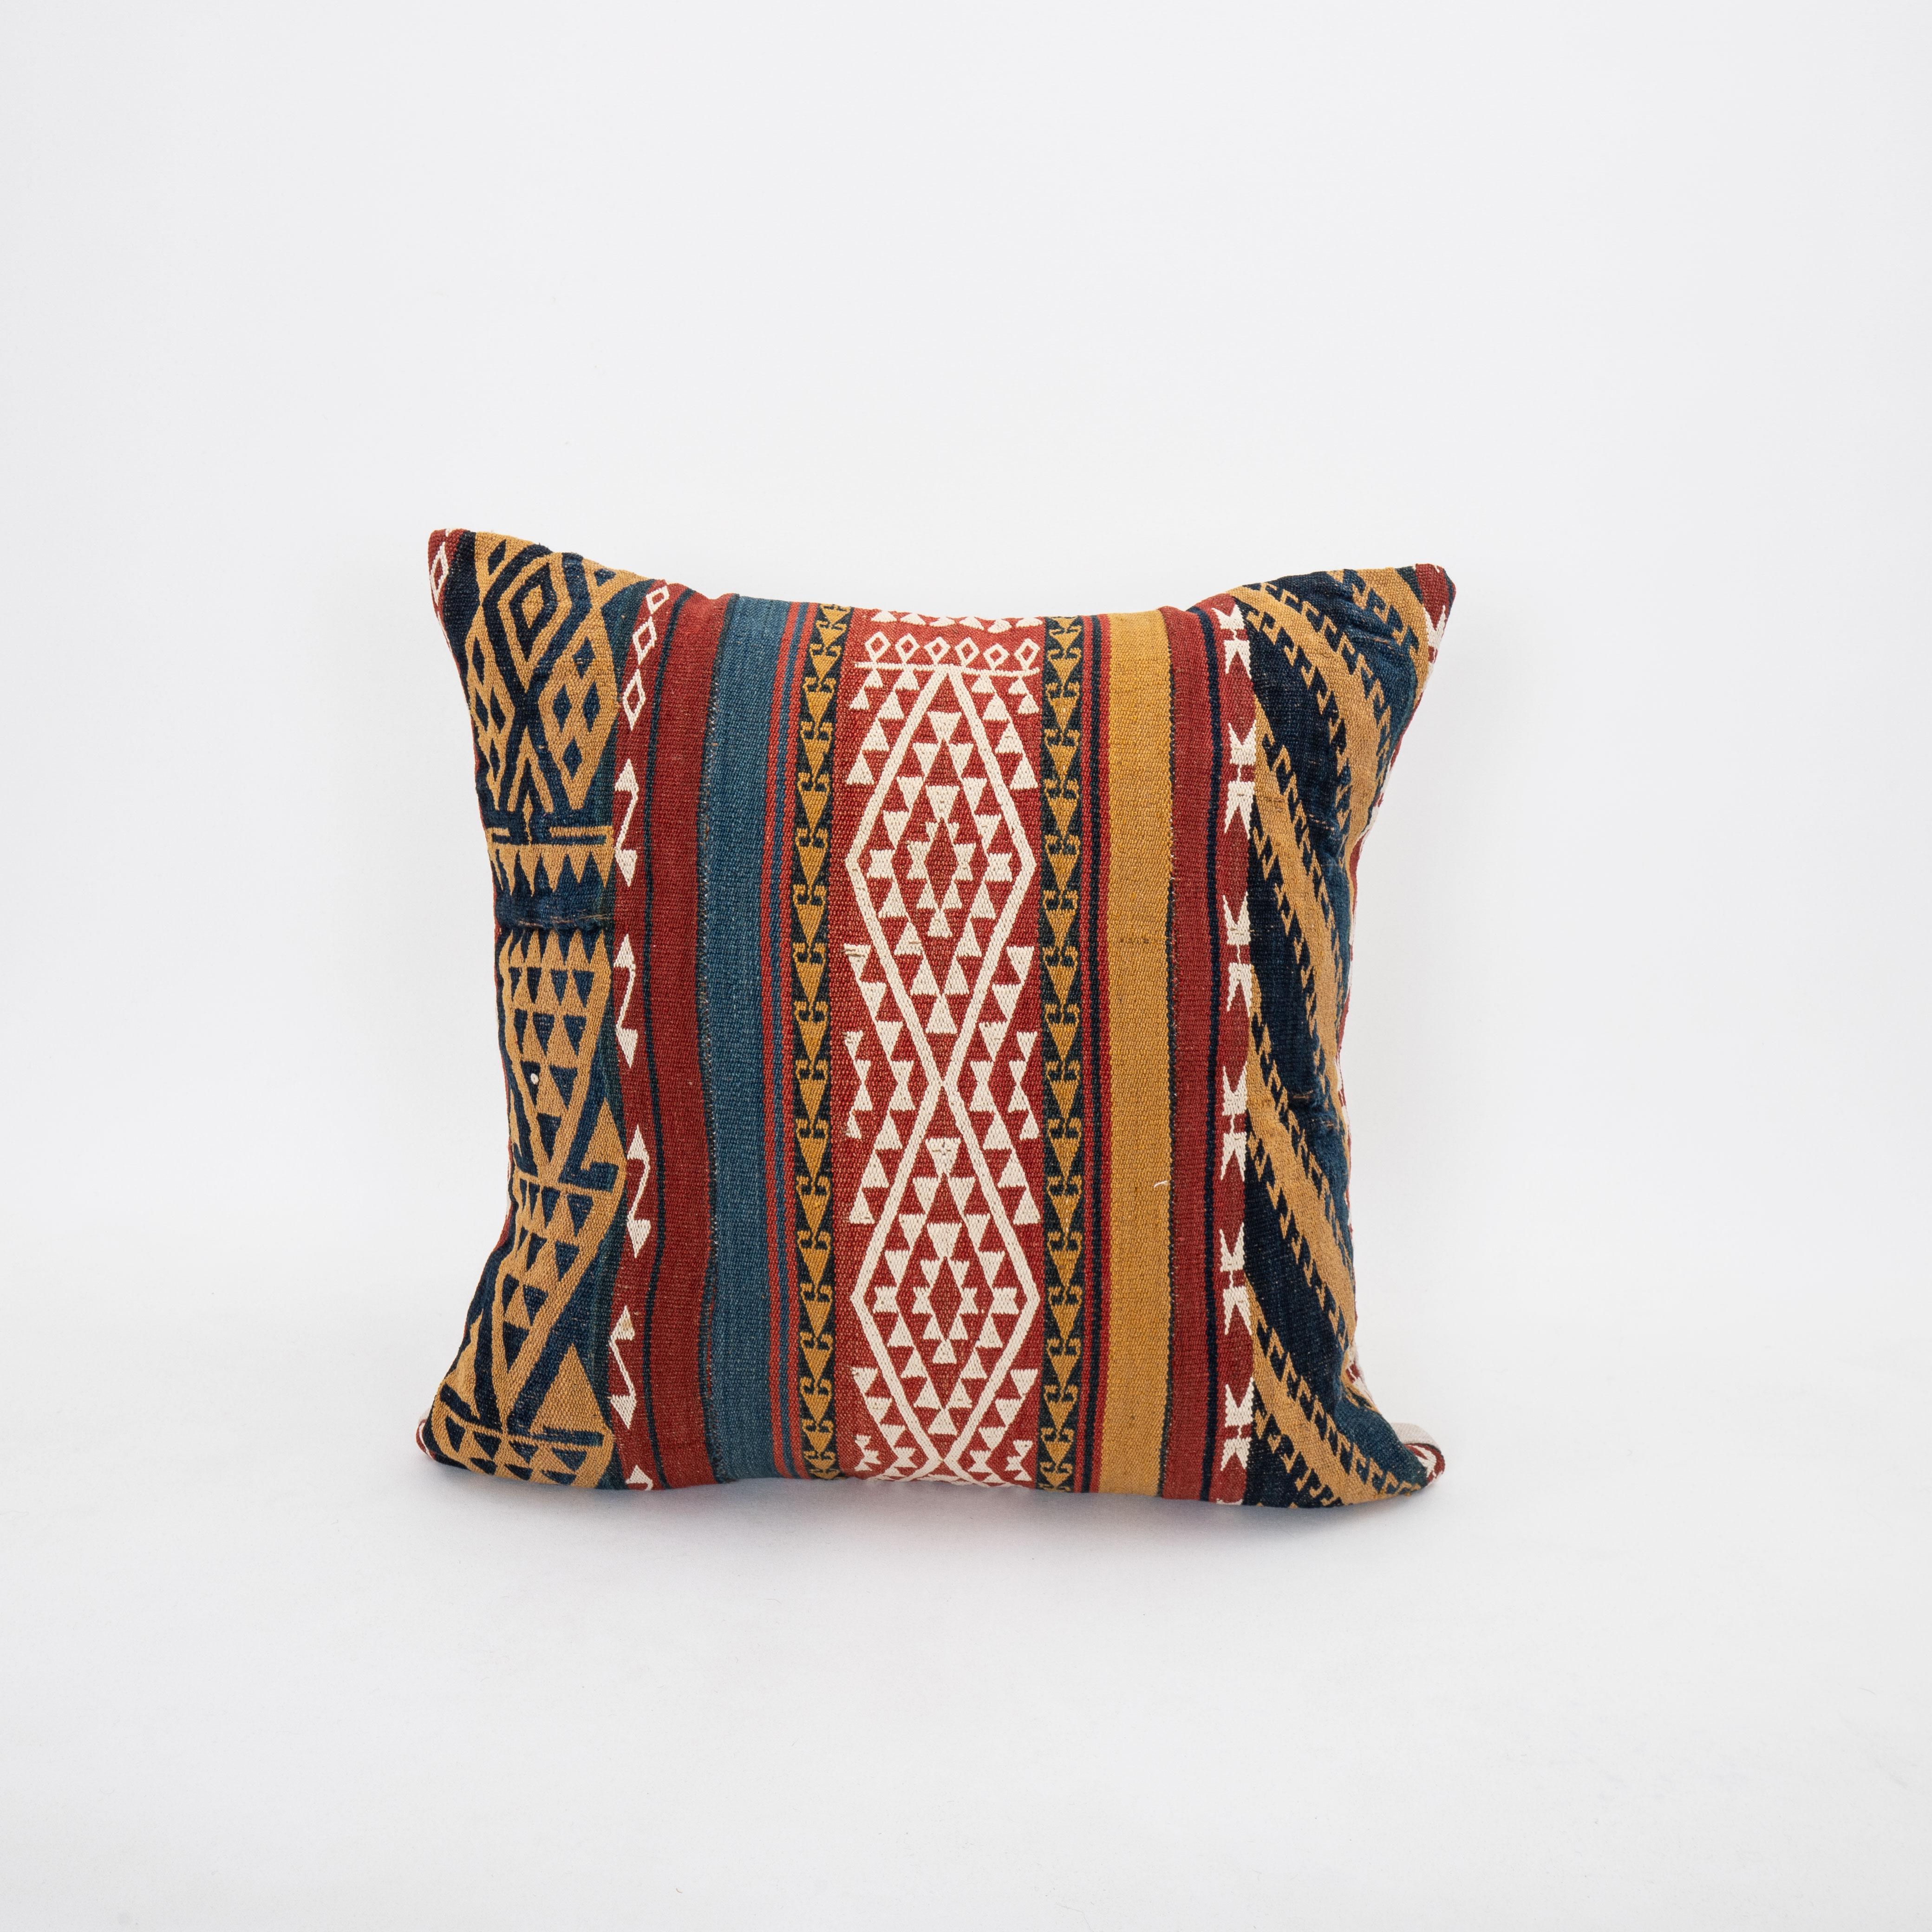 This pillowcase was made from a Central Asian , Uzbek Gudjeri ( jajim ) kilim, late 19th C.
It does not come with an insert. 
Zipper closure.
Der clean recommended.

